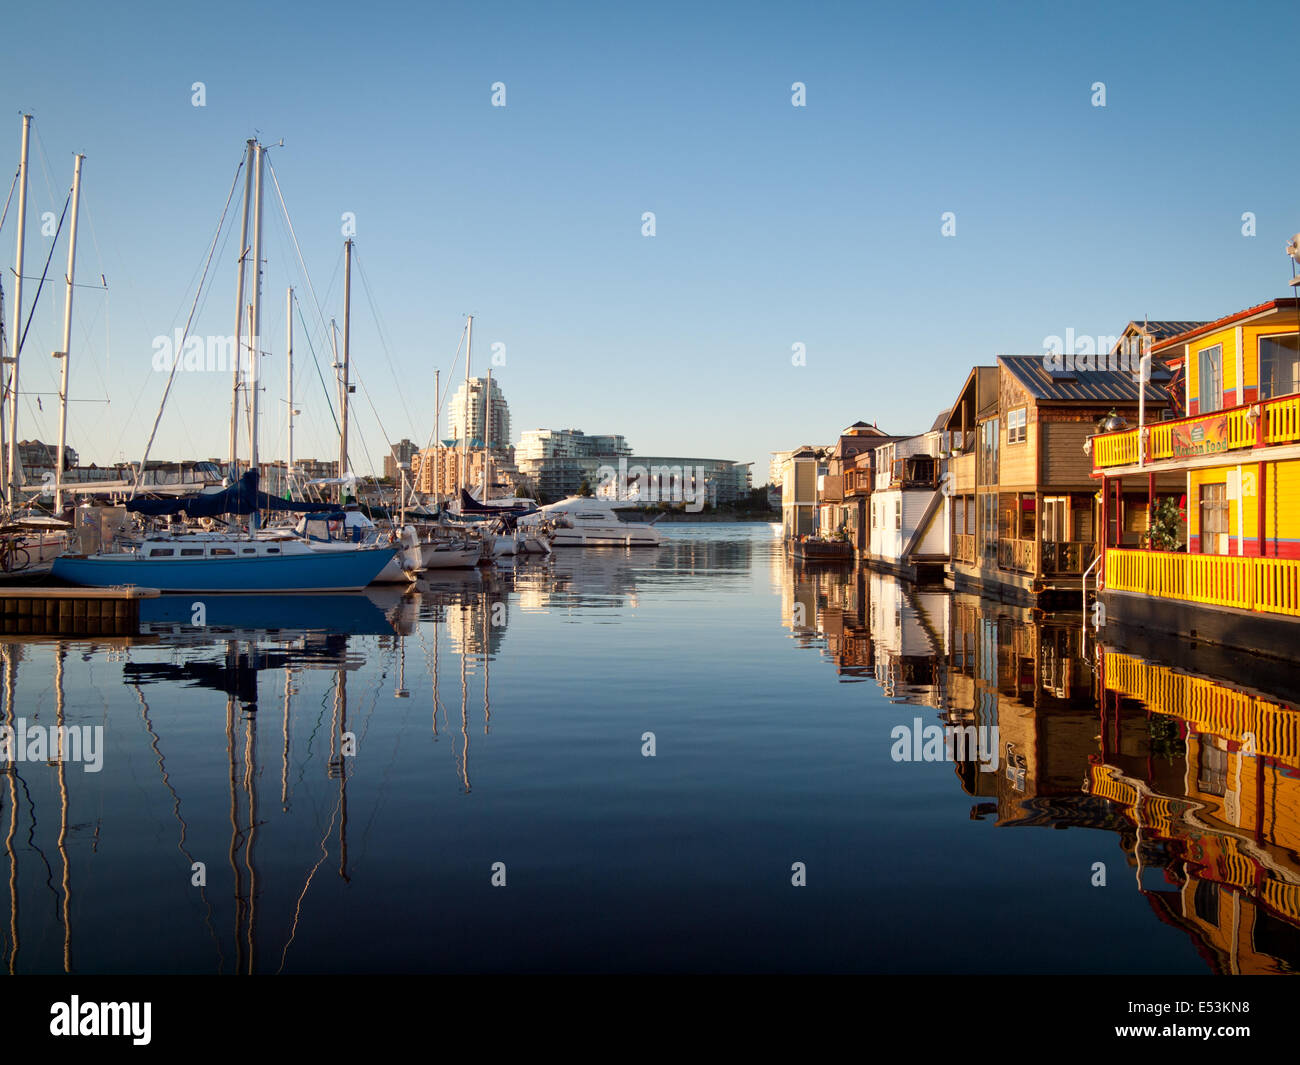 A serene view of boats and houseboats moored at Fisherman's Wharf in Victoria, British Columbia, Canada. Stock Photo